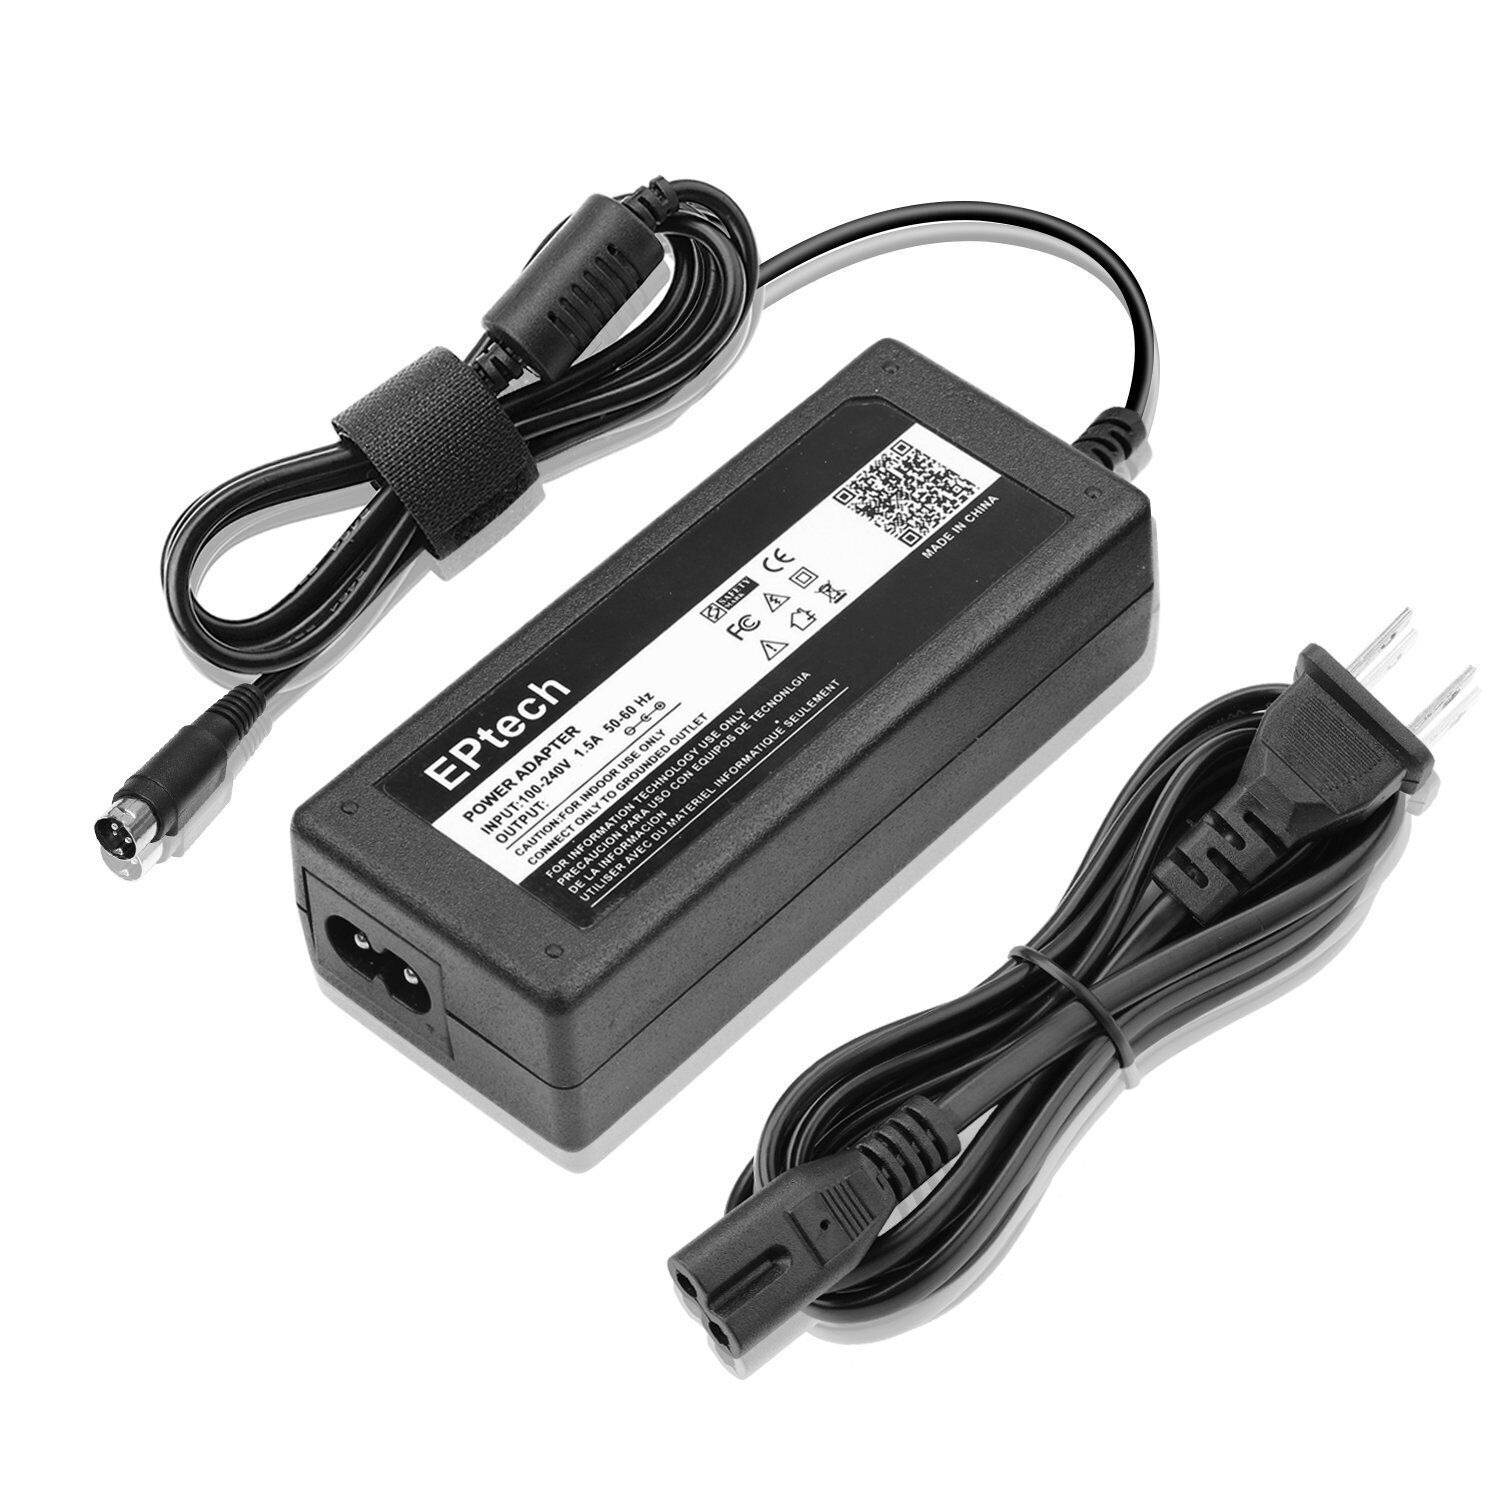 3-Pin DIN 24V 3A AC/DC Adapter for Star Micronics TSP-700 TSP700 Point of Sal...